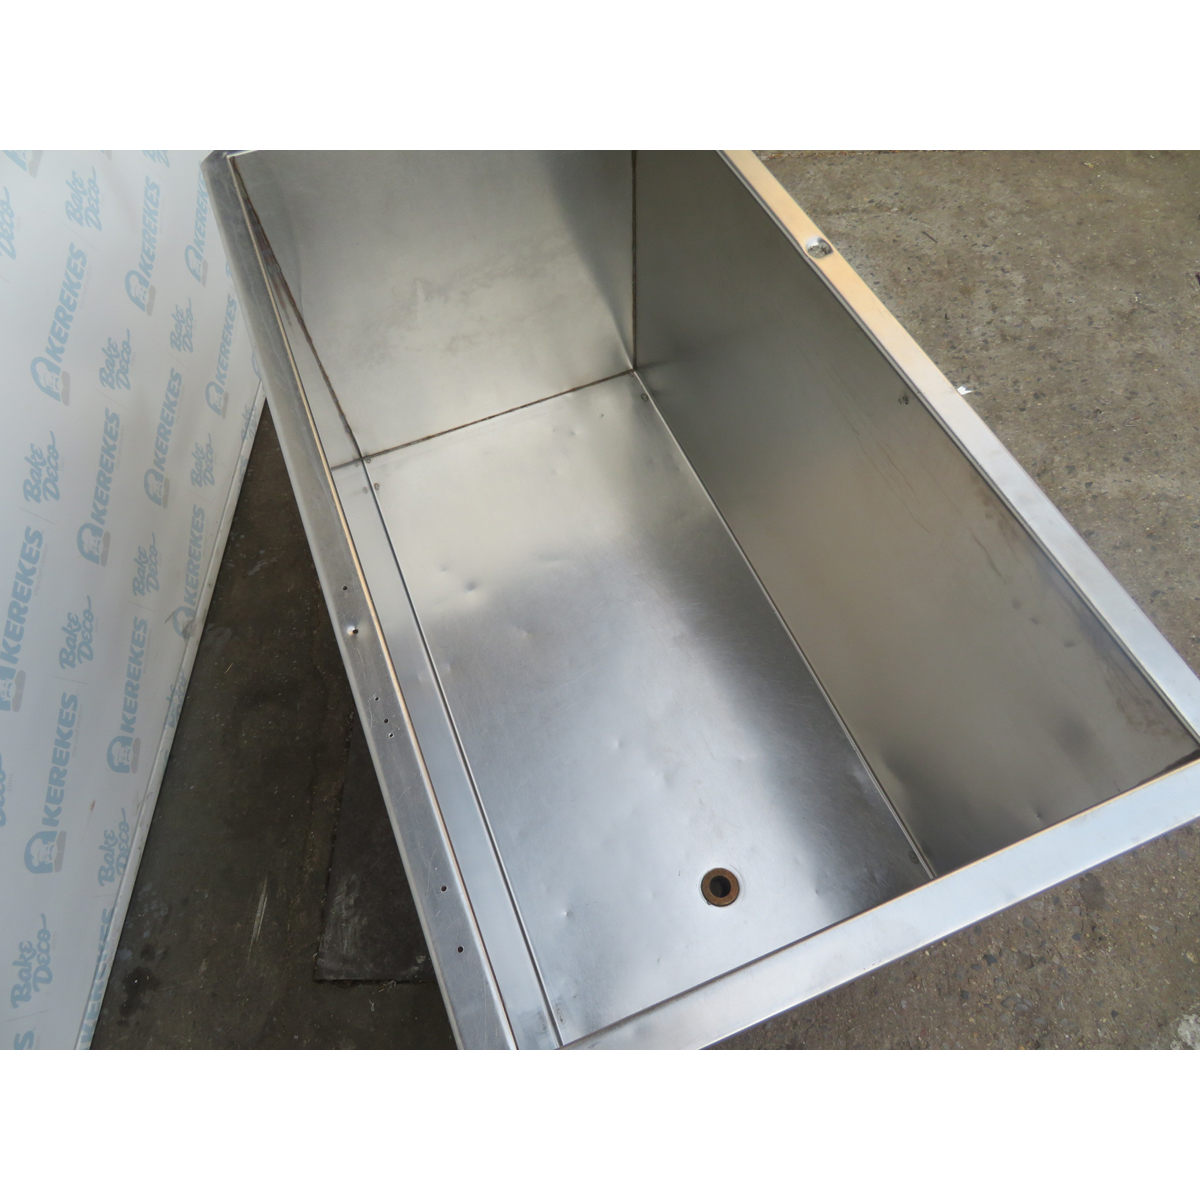 Custom Stainless Steel Tub With Drain, Used Excellent Condition image 2